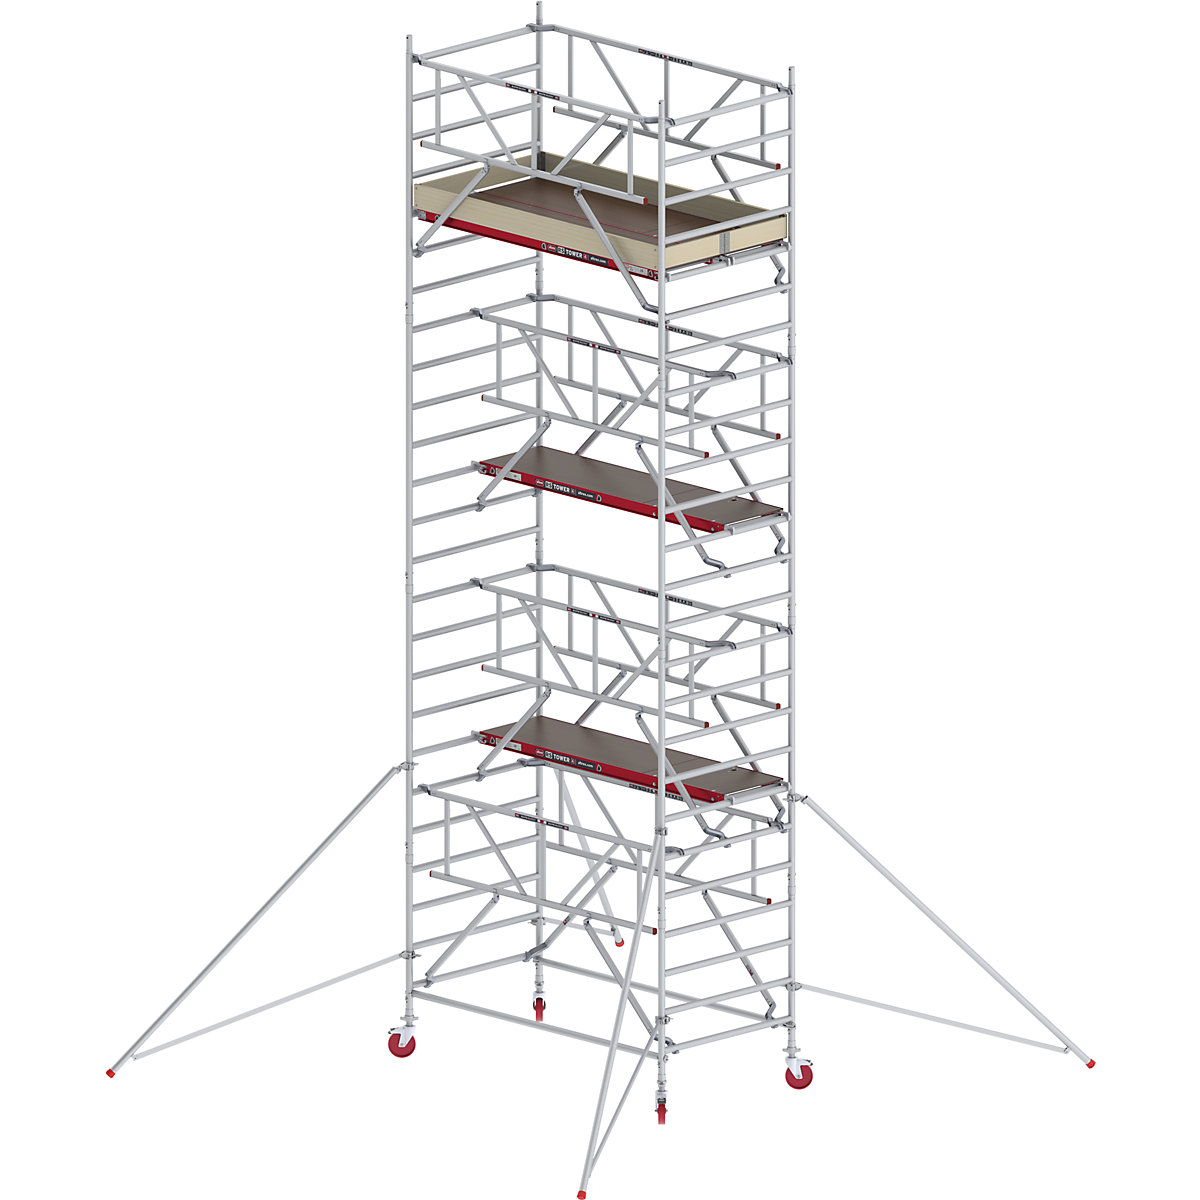 RS TOWER 42 wide mobile access tower with Safe-Quick® – Altrex, wooden platform, length 1.85 m, working height 8.20 m-6